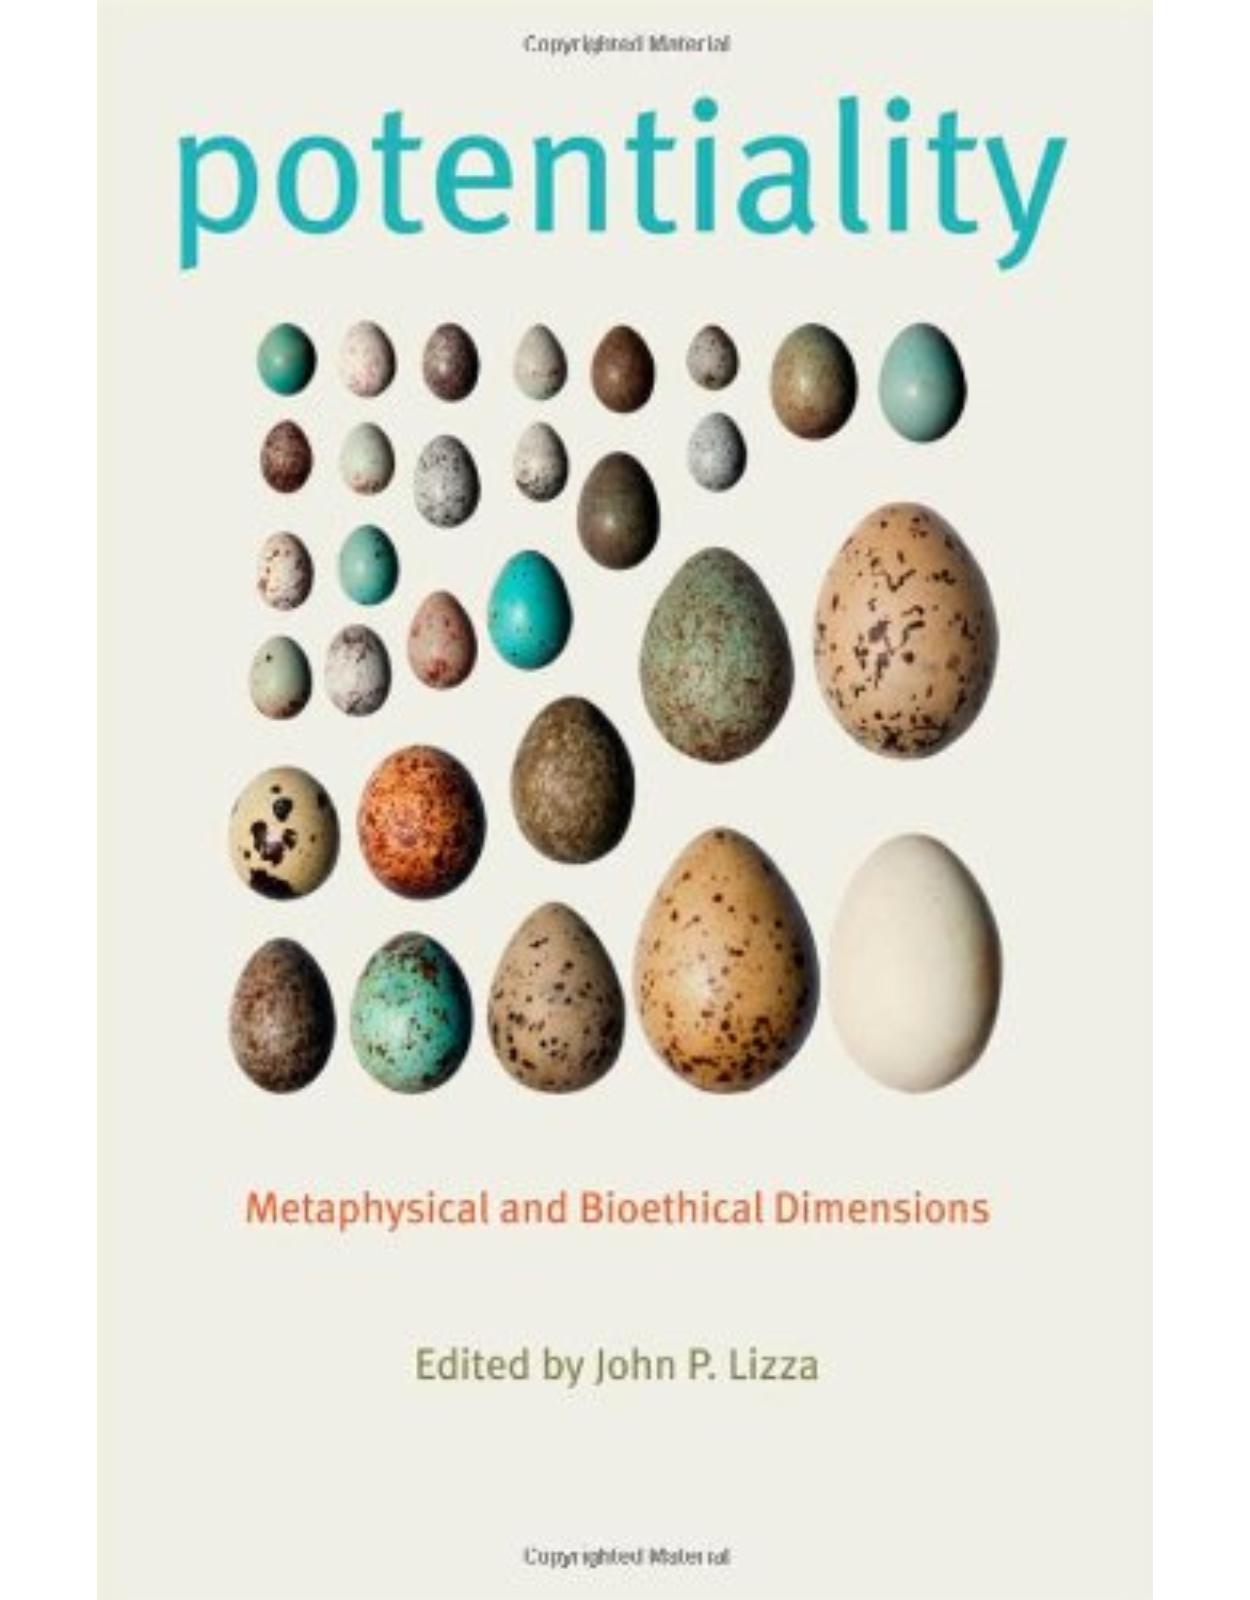 Potentiality, Metaphysical and Bioethical Dimensions